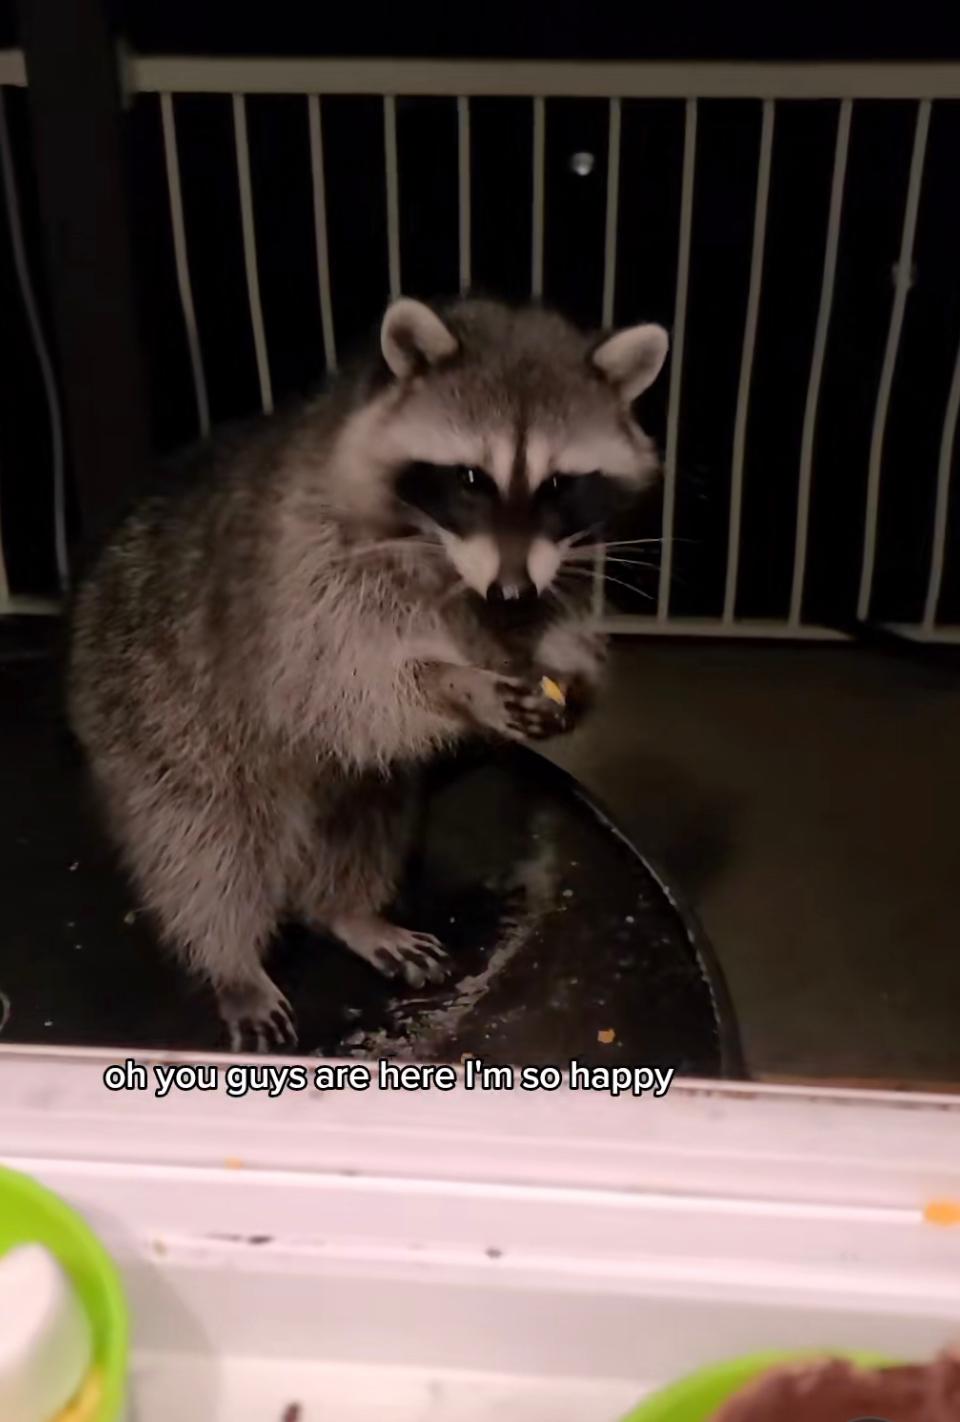 Wilbur and Grace and The Raccoon on TikTok